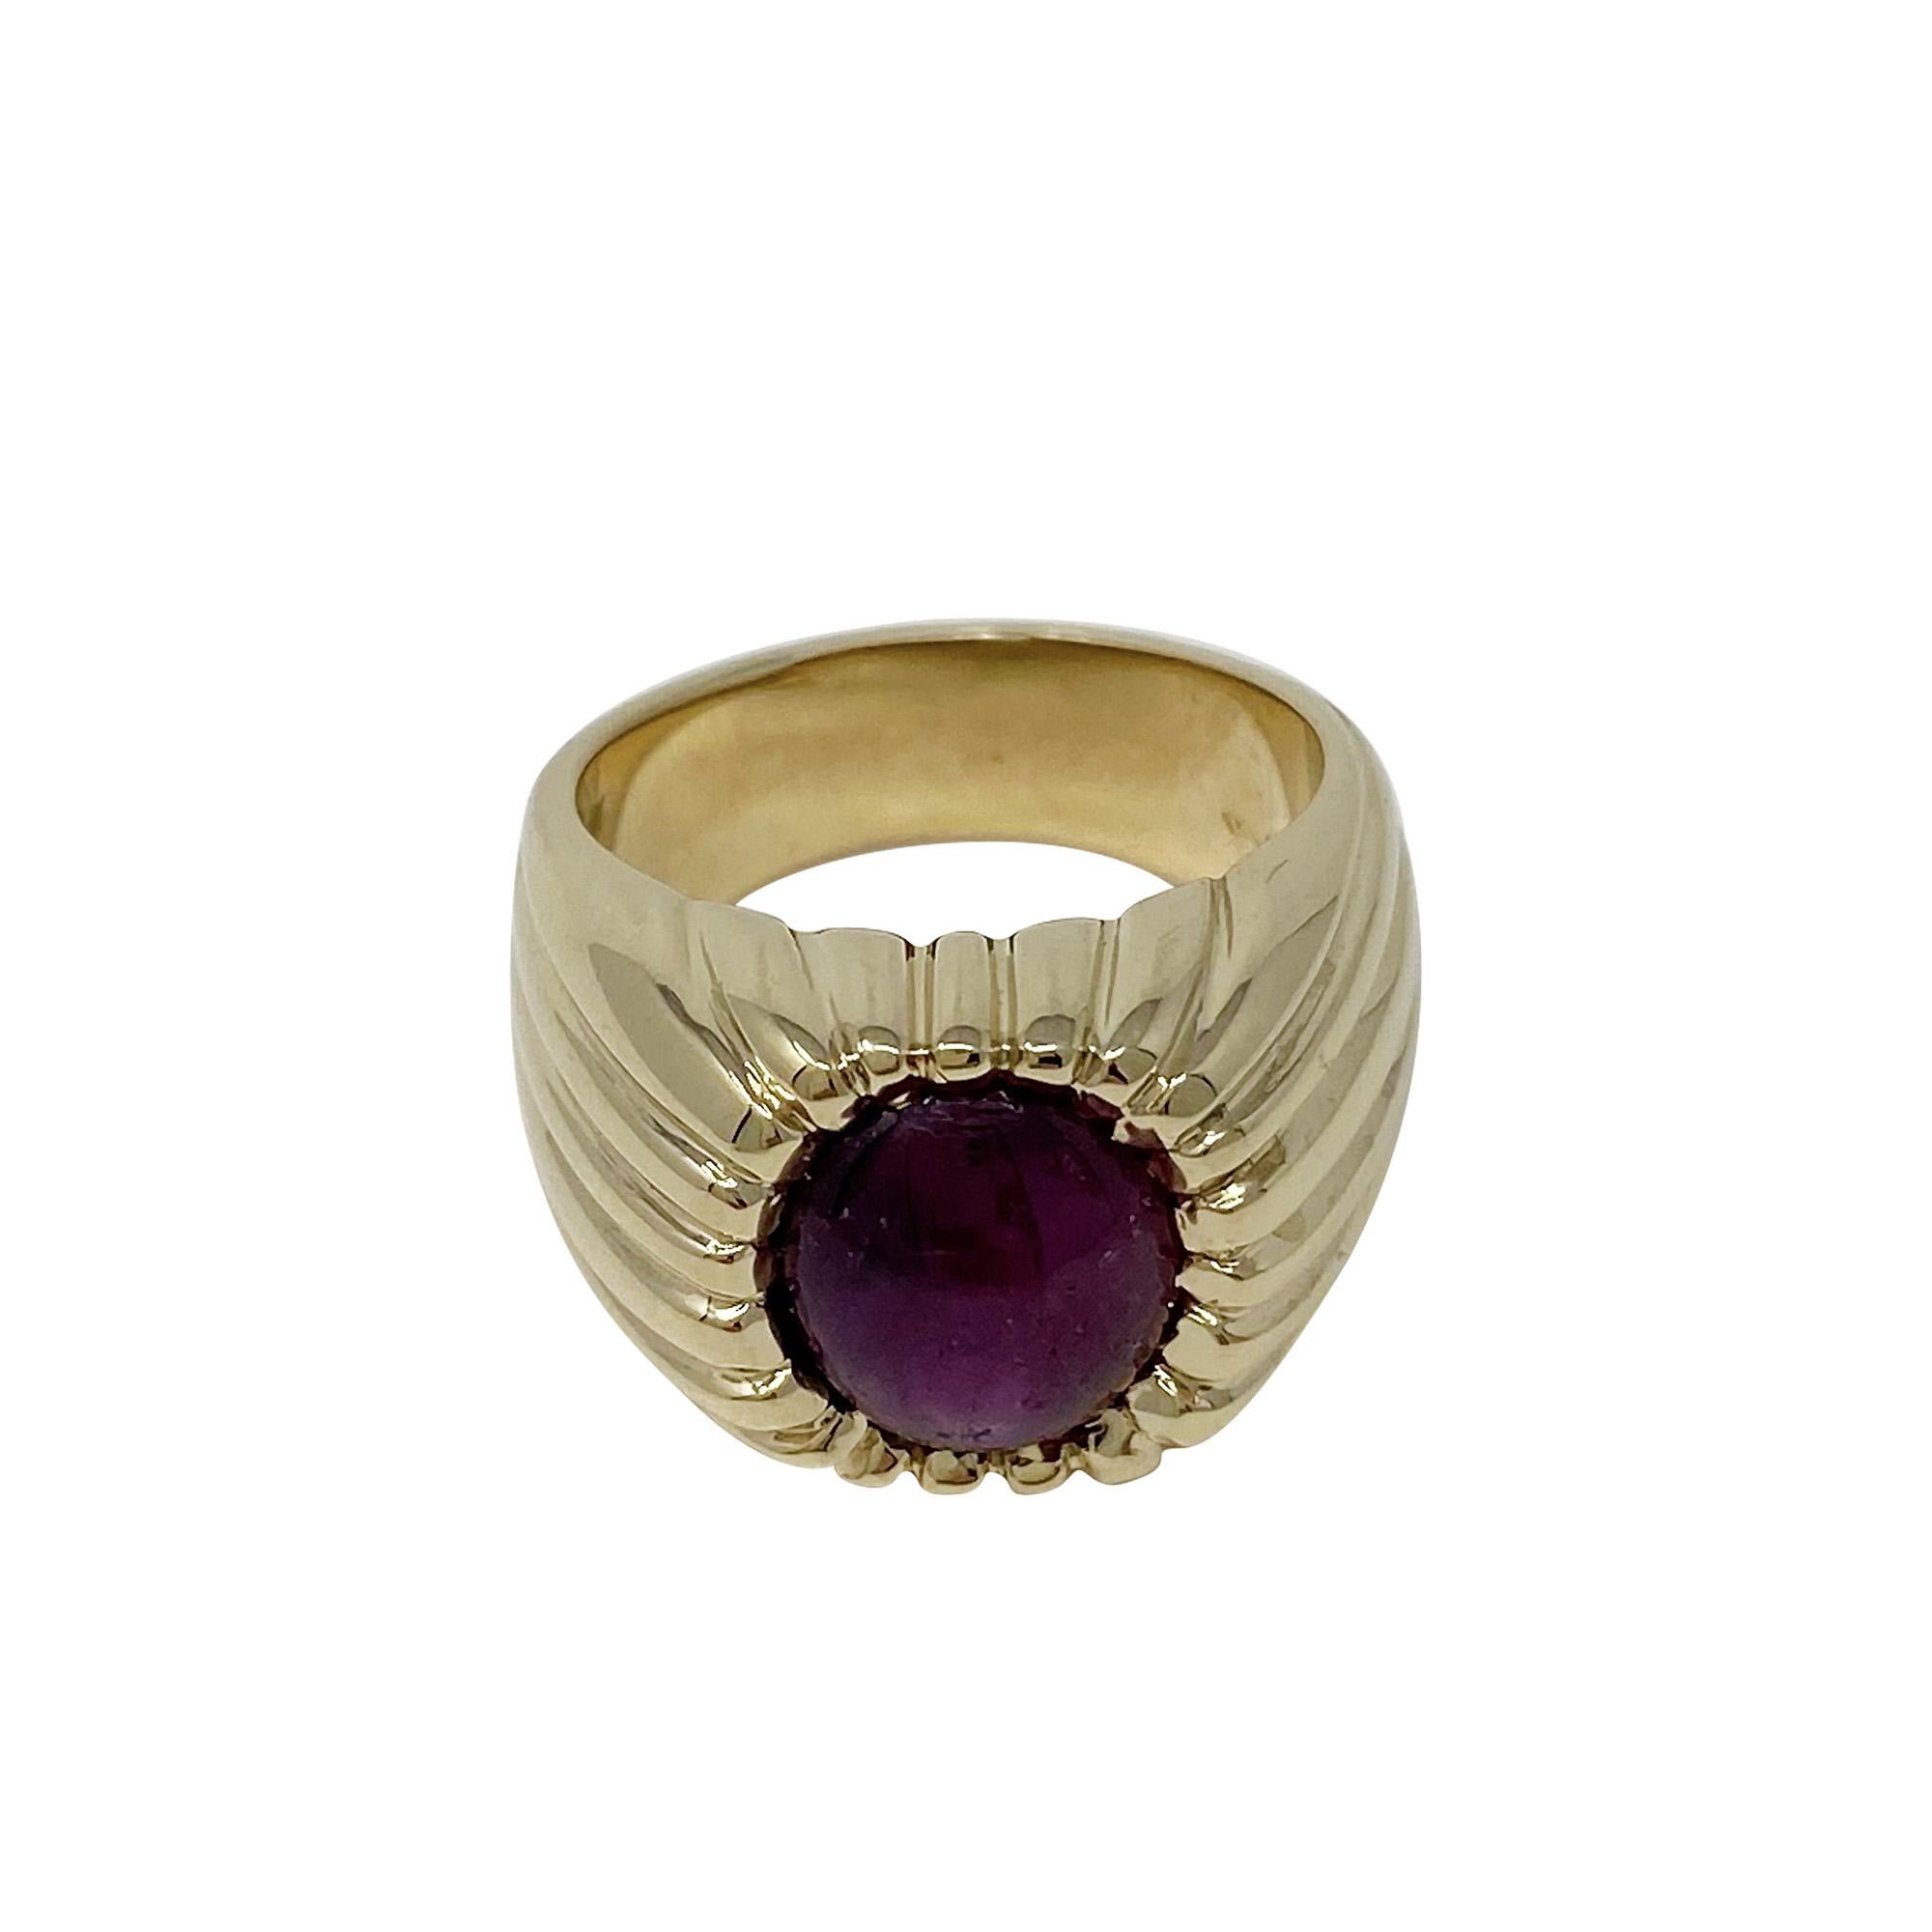 This 14 karat yellow gold, ridged mounting is the perfect compliment to the oval-shaped, cabochon-cut 5.00 carat ruby!  Size 6